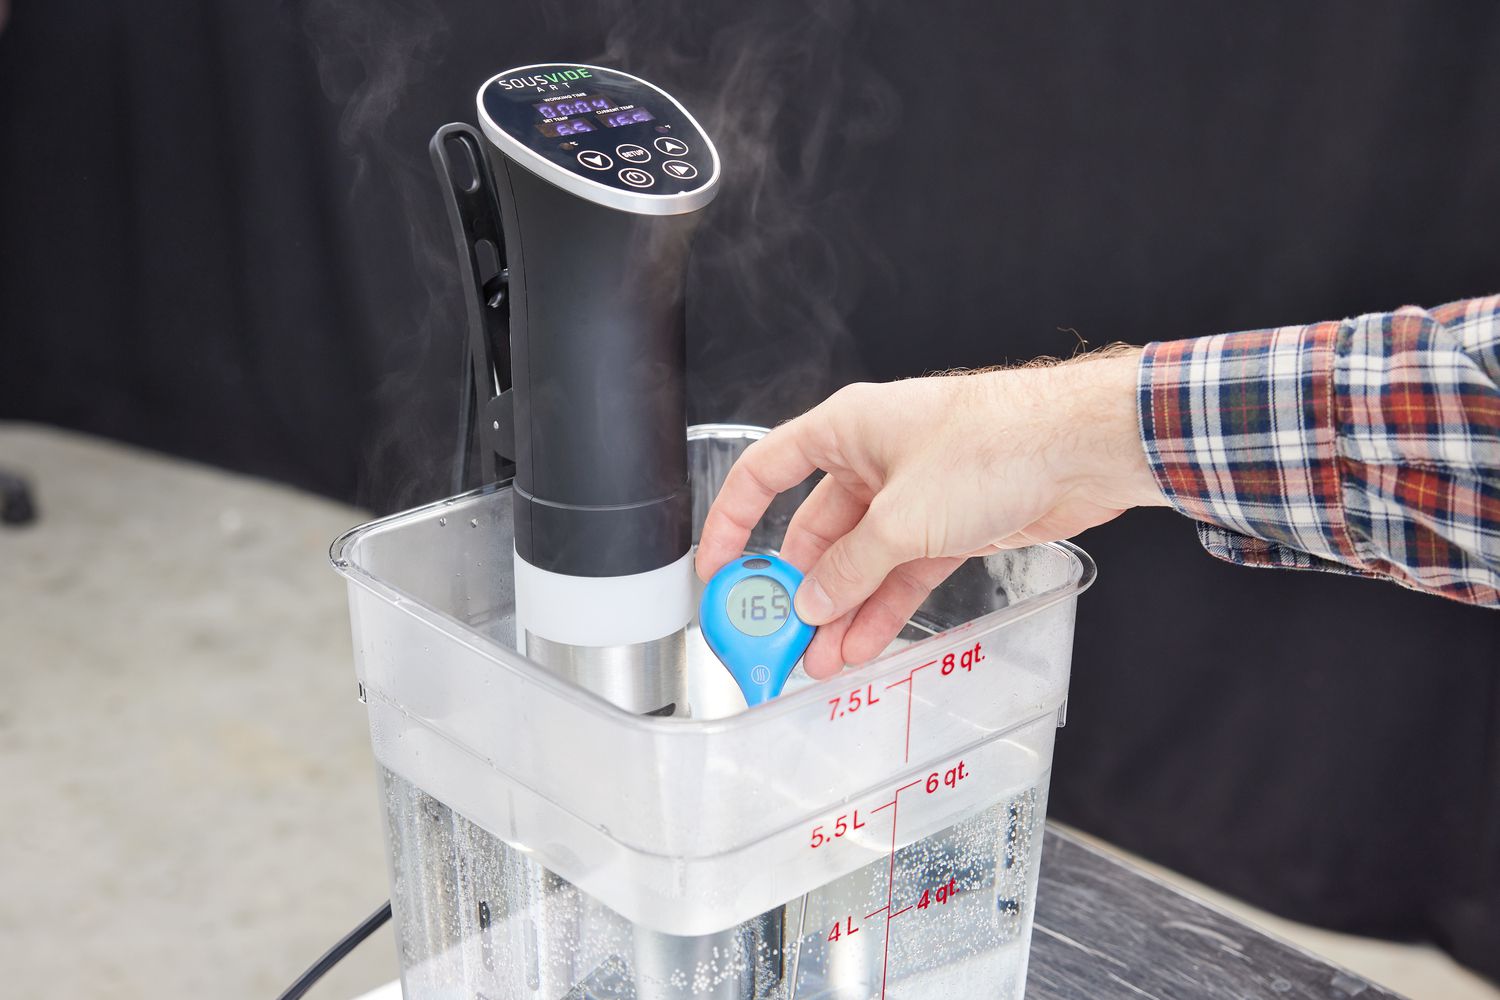 A sous vide machine heating up a cambro container filled with water and a hand with a thermometer taking the temperature of the water